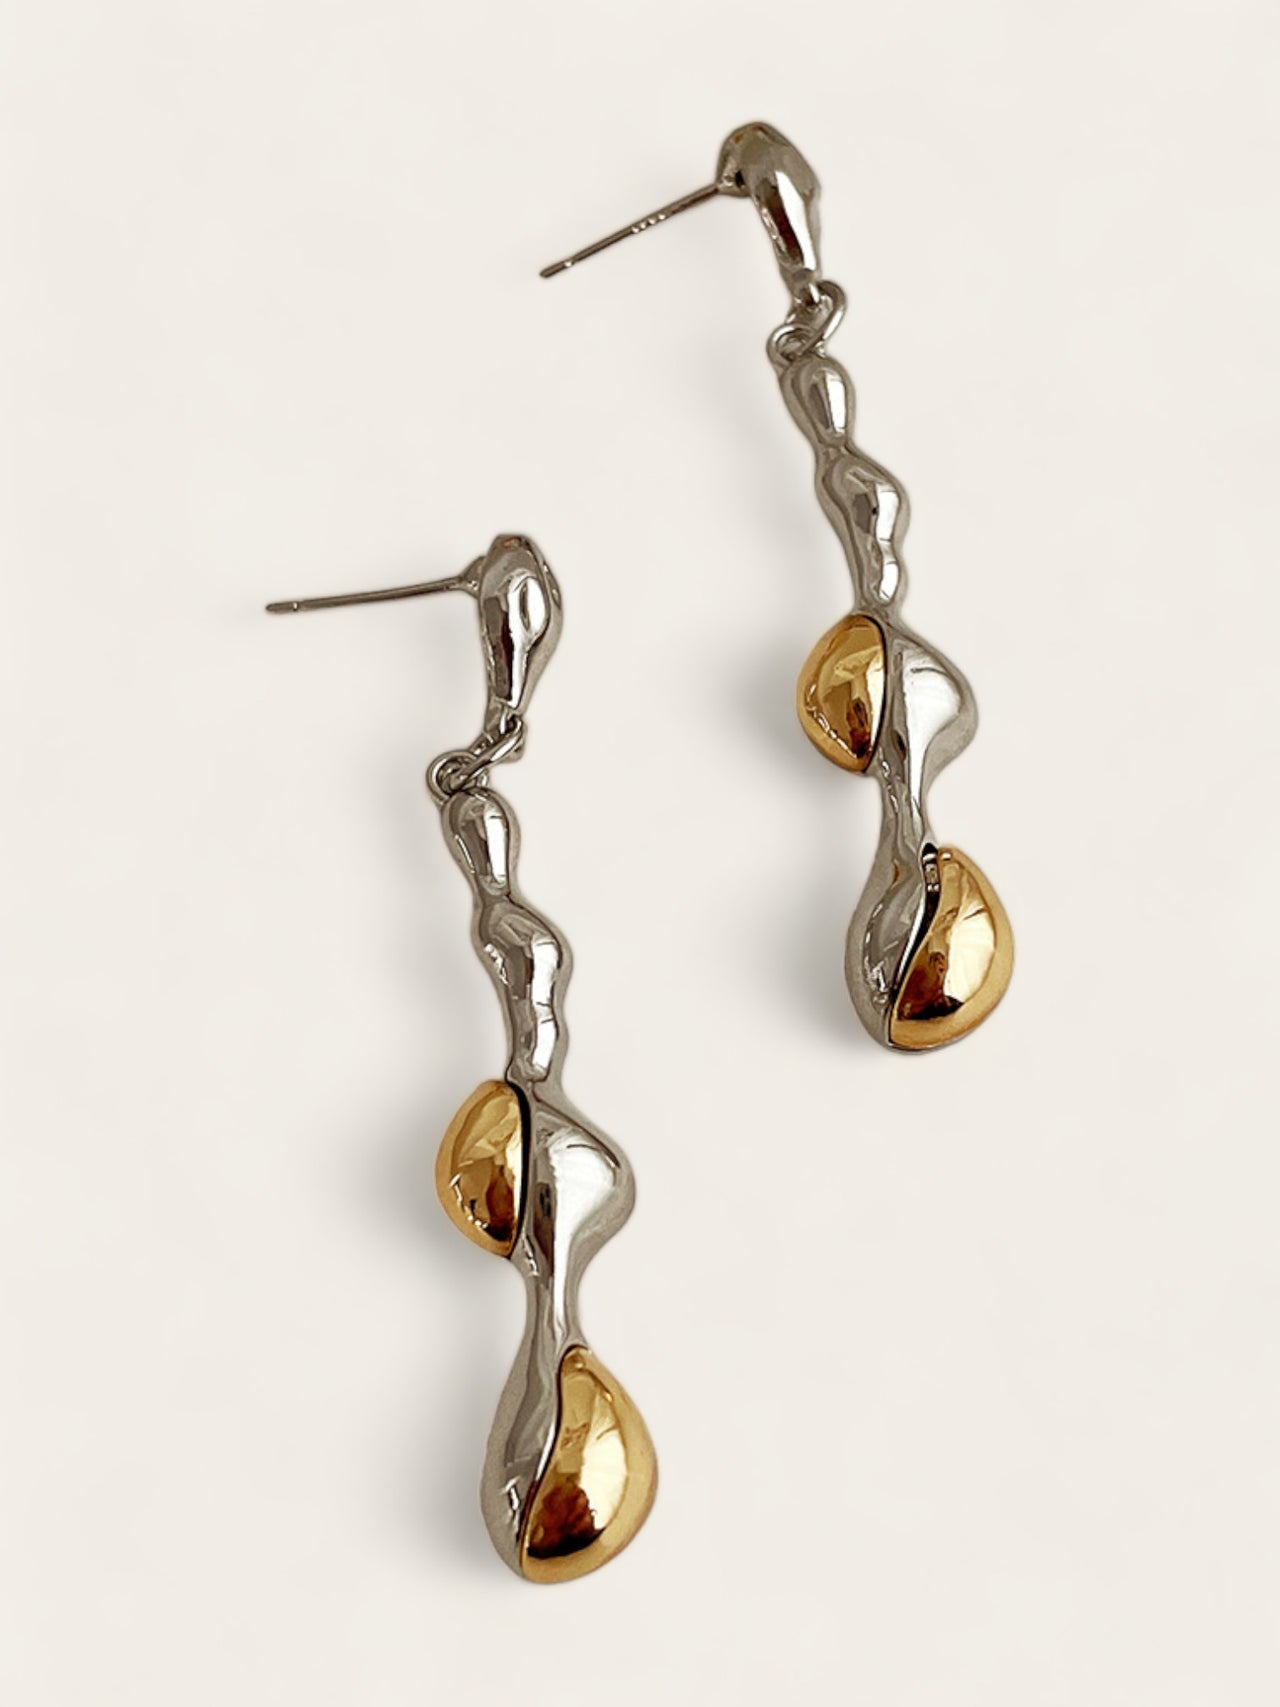 Melted Metals Earrings